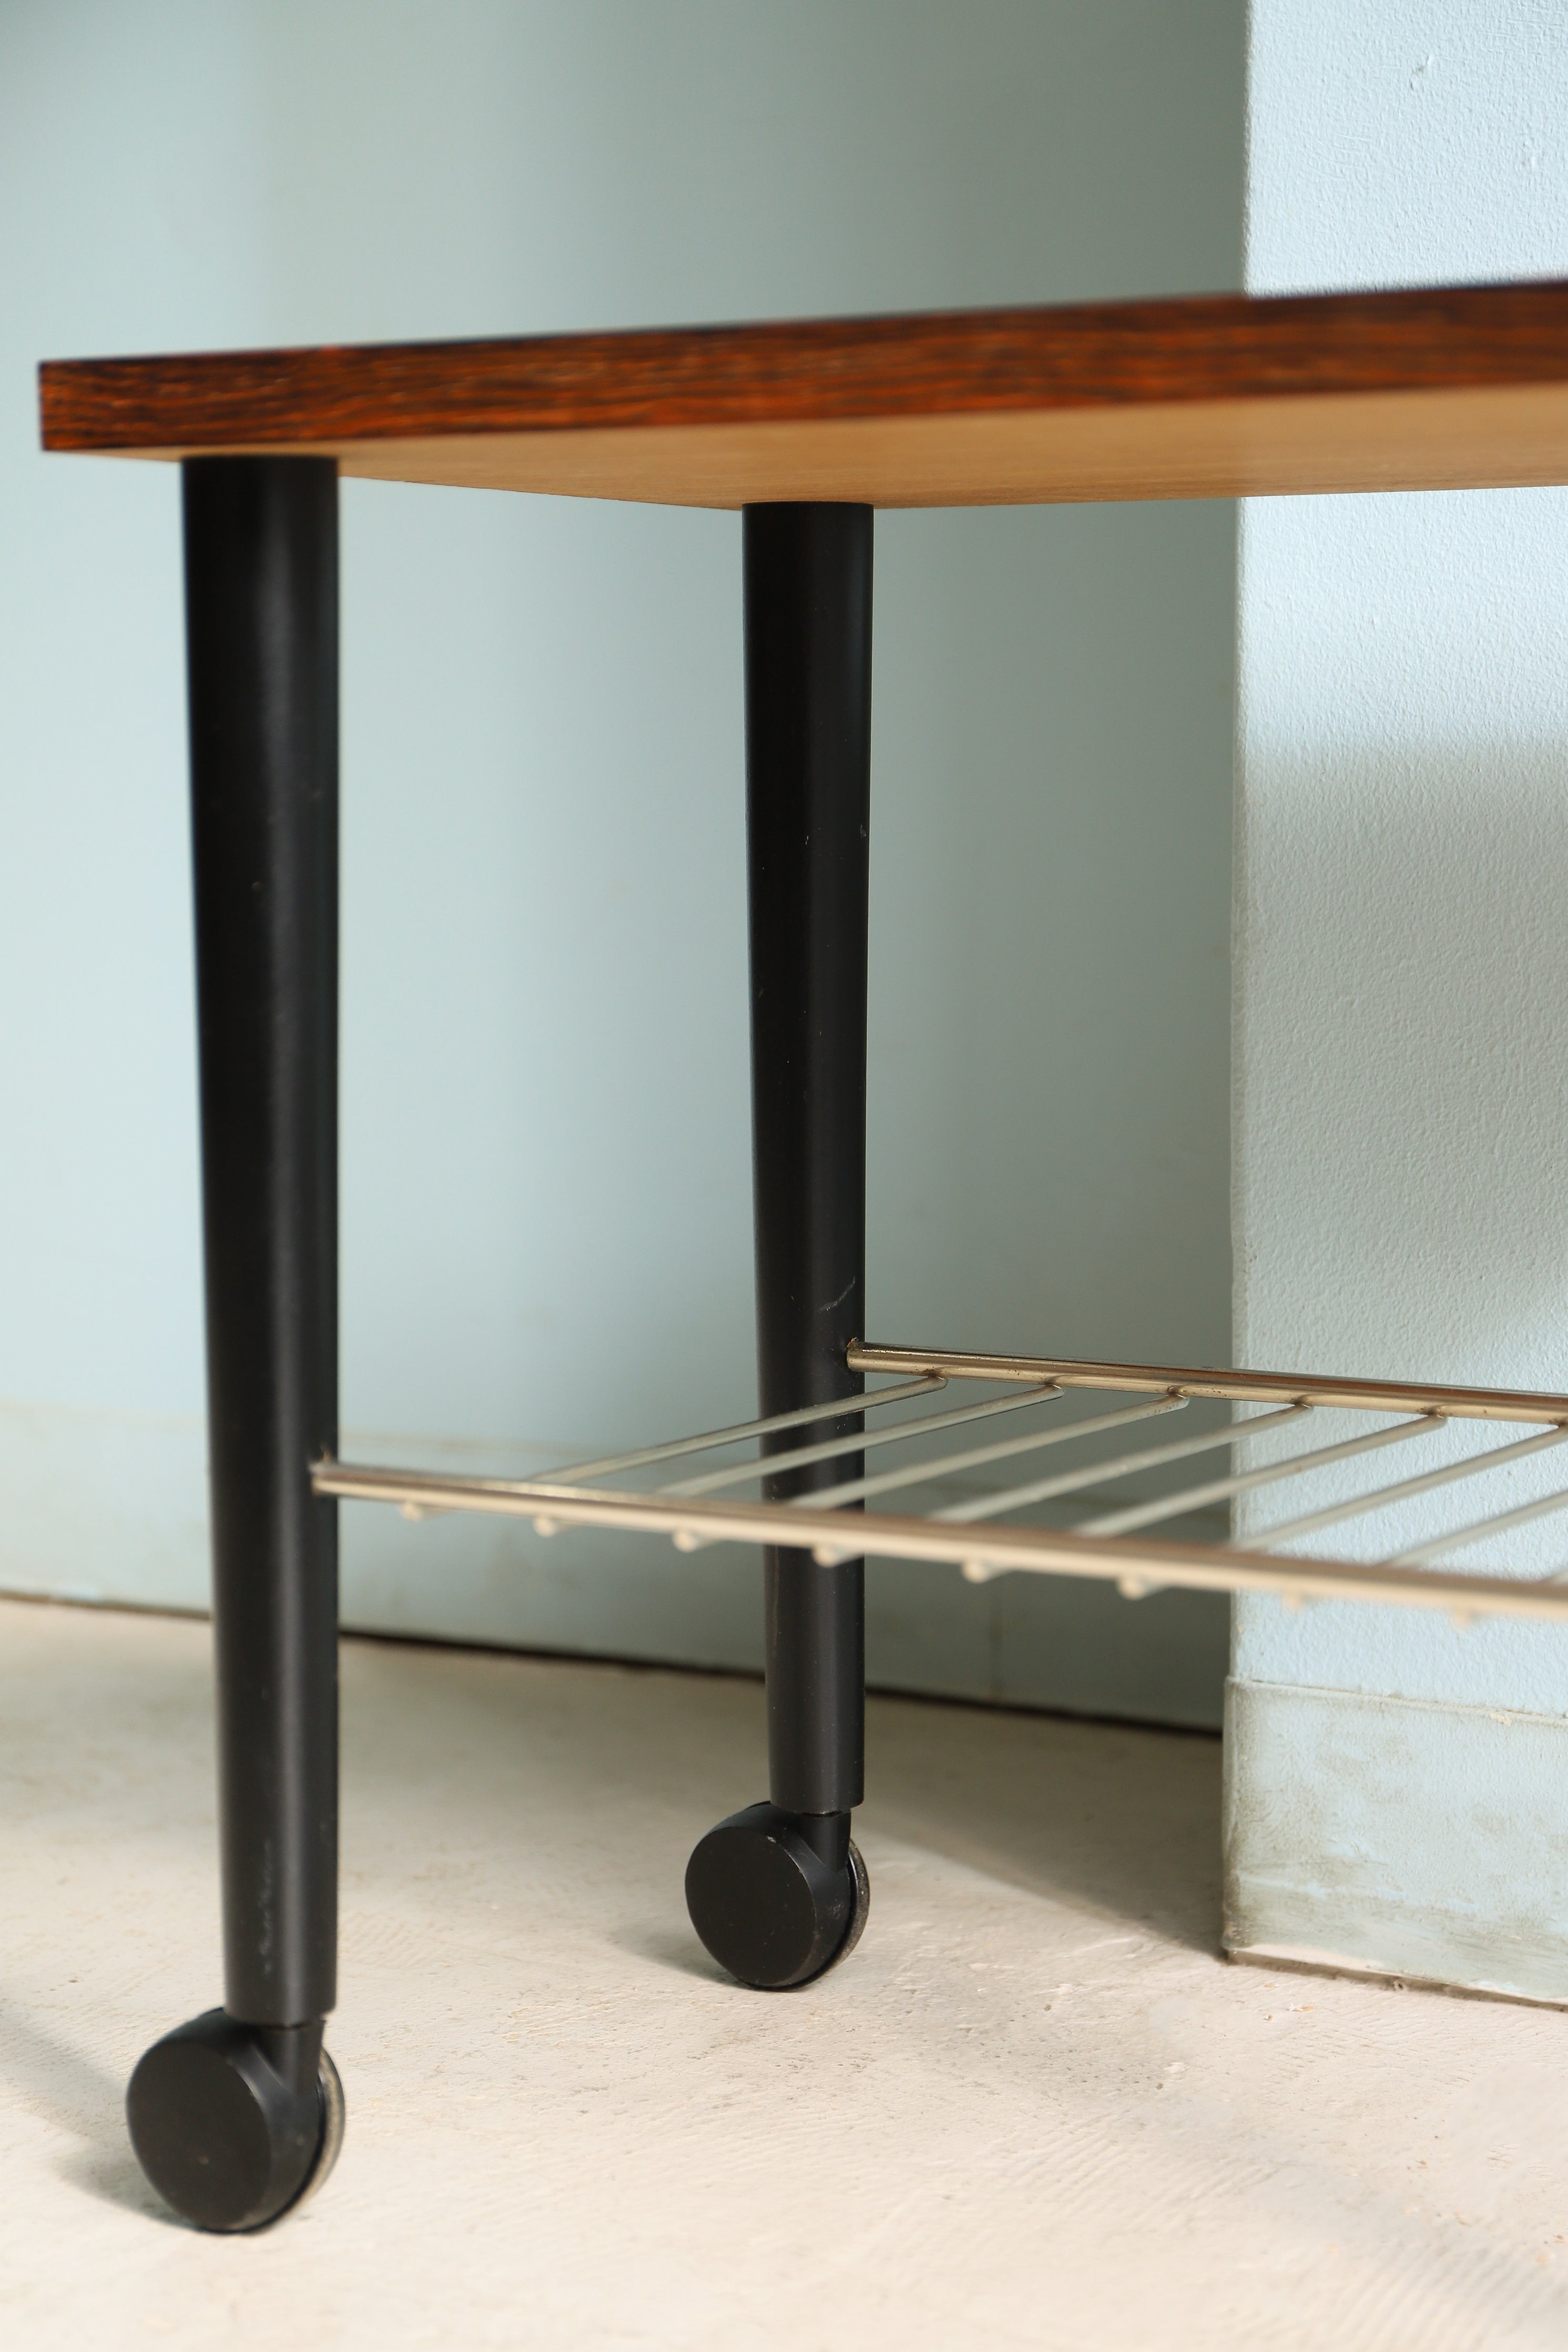 Scandinavian Vintage Rosewood Side Table Trolley/北欧ヴィンテージ サイドテーブル トロリー ローズウッド材